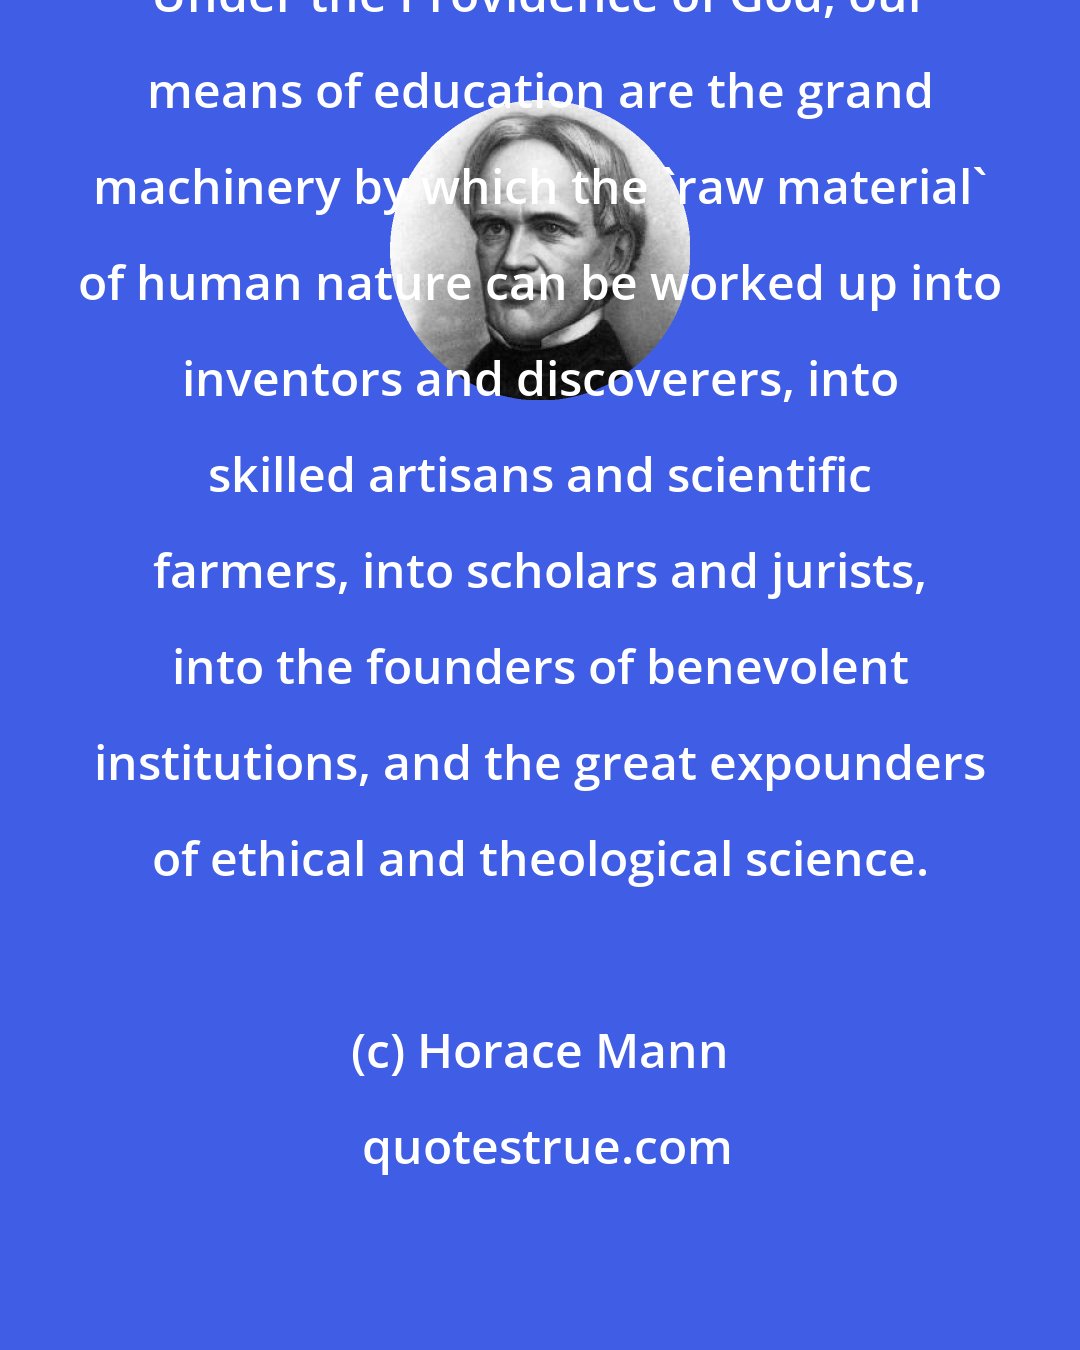 Horace Mann: Under the Providence of God, our means of education are the grand machinery by which the 'raw material' of human nature can be worked up into inventors and discoverers, into skilled artisans and scientific farmers, into scholars and jurists, into the founders of benevolent institutions, and the great expounders of ethical and theological science.